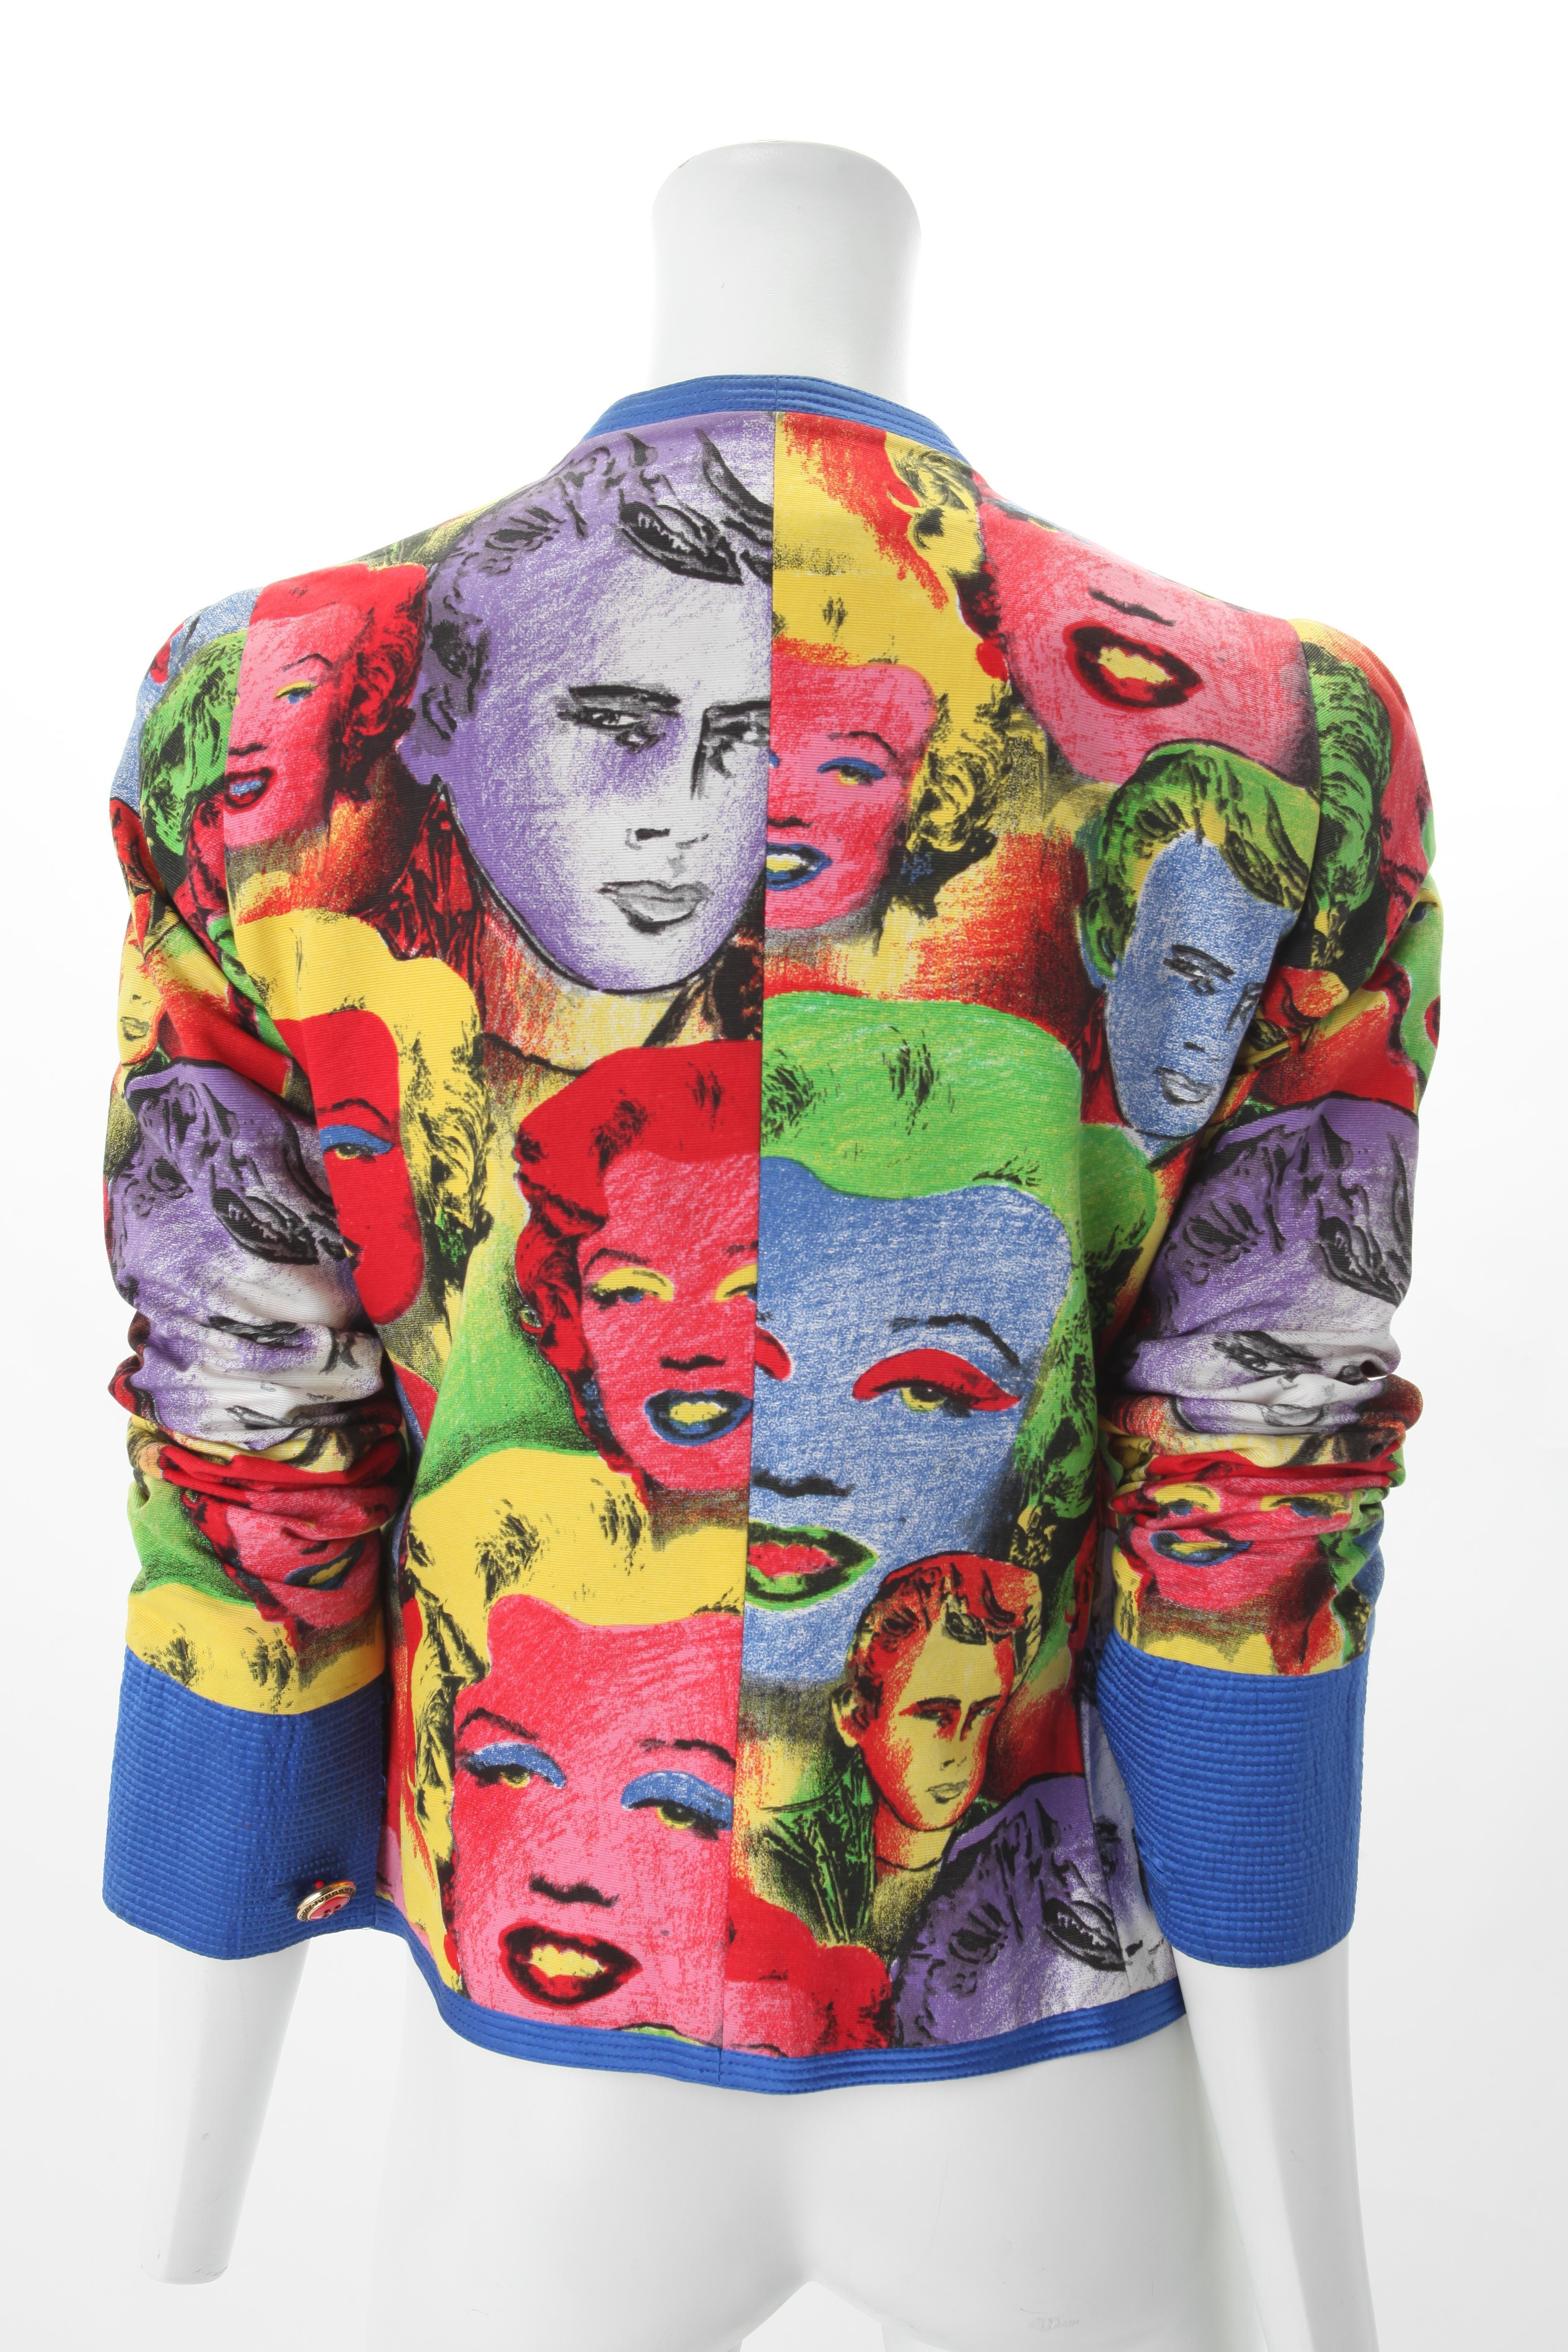 Gianni Versace Couture Andy Warhol Print Jacket and Skirt Ensemble, c.1990.
Gianni Versace Couture Screen Printed Cotton Jacket featuring the famous pop art Andy Warhol images of dead Hollywood icons Marilyn Monroe and James Dean. Adorning five red